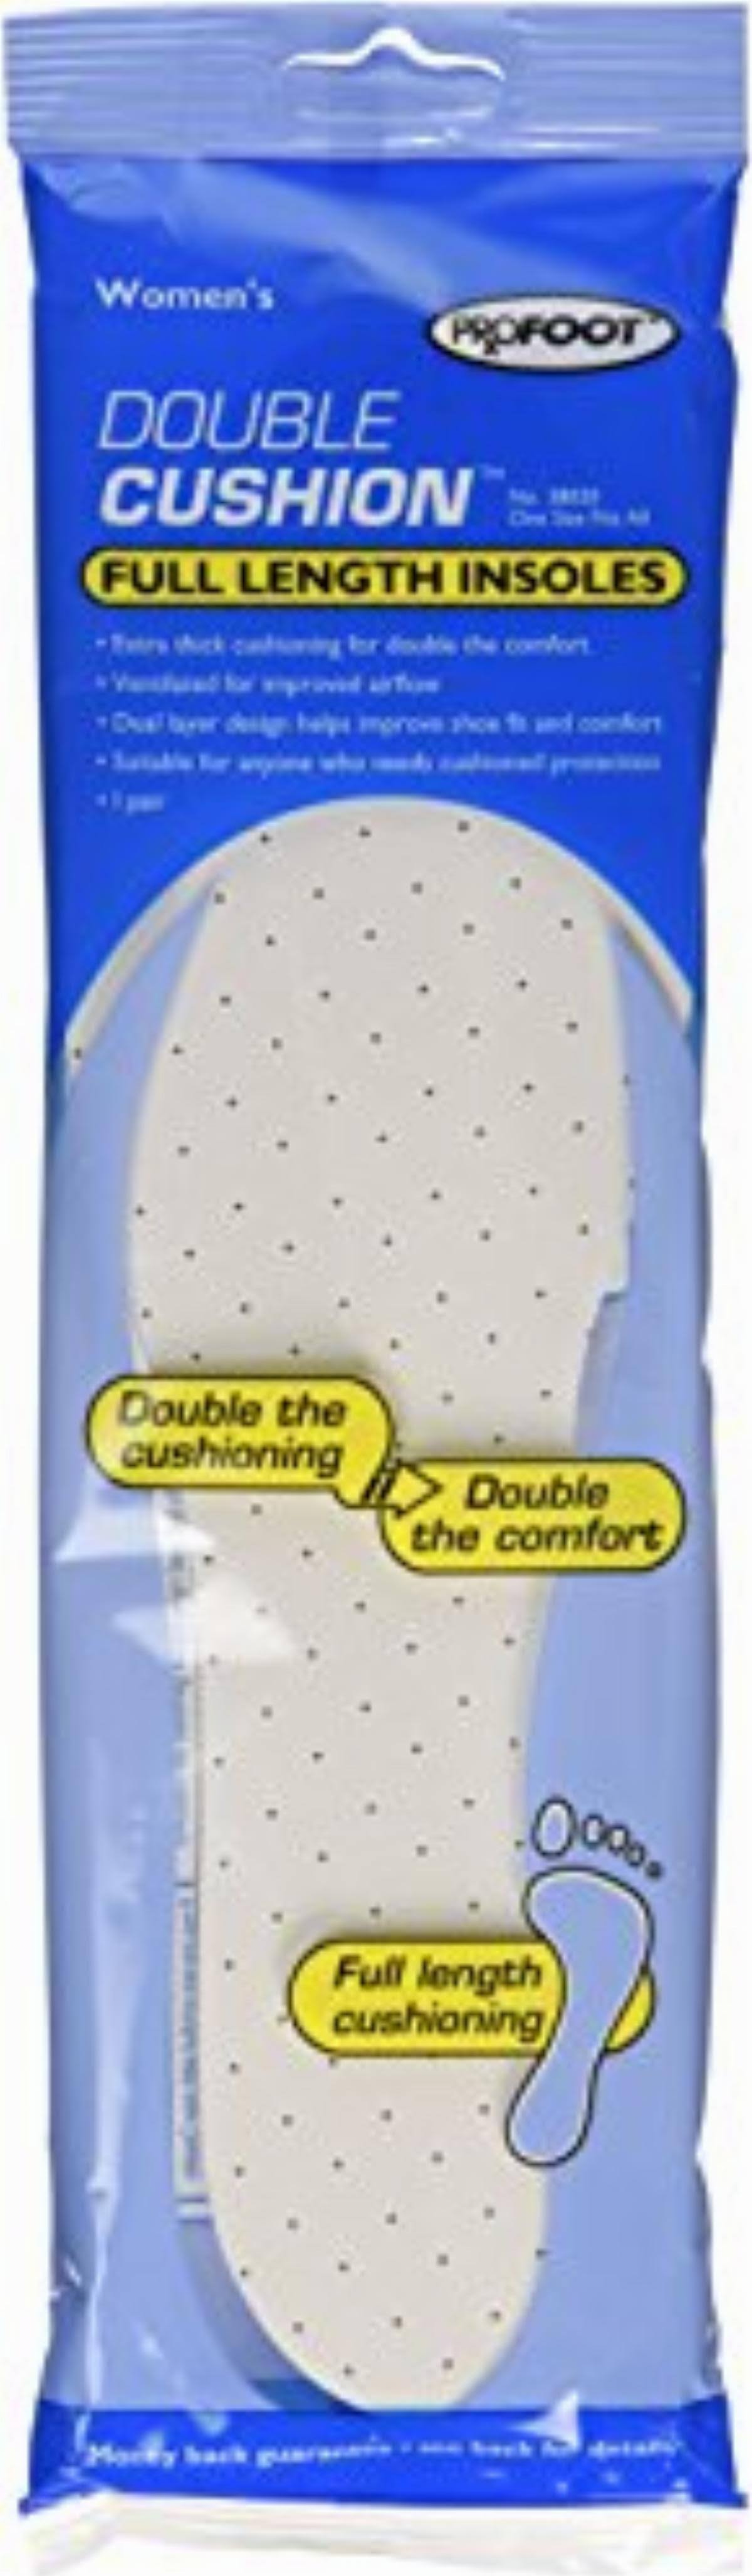 Profoot Double Cushion Insoles Full Length Women